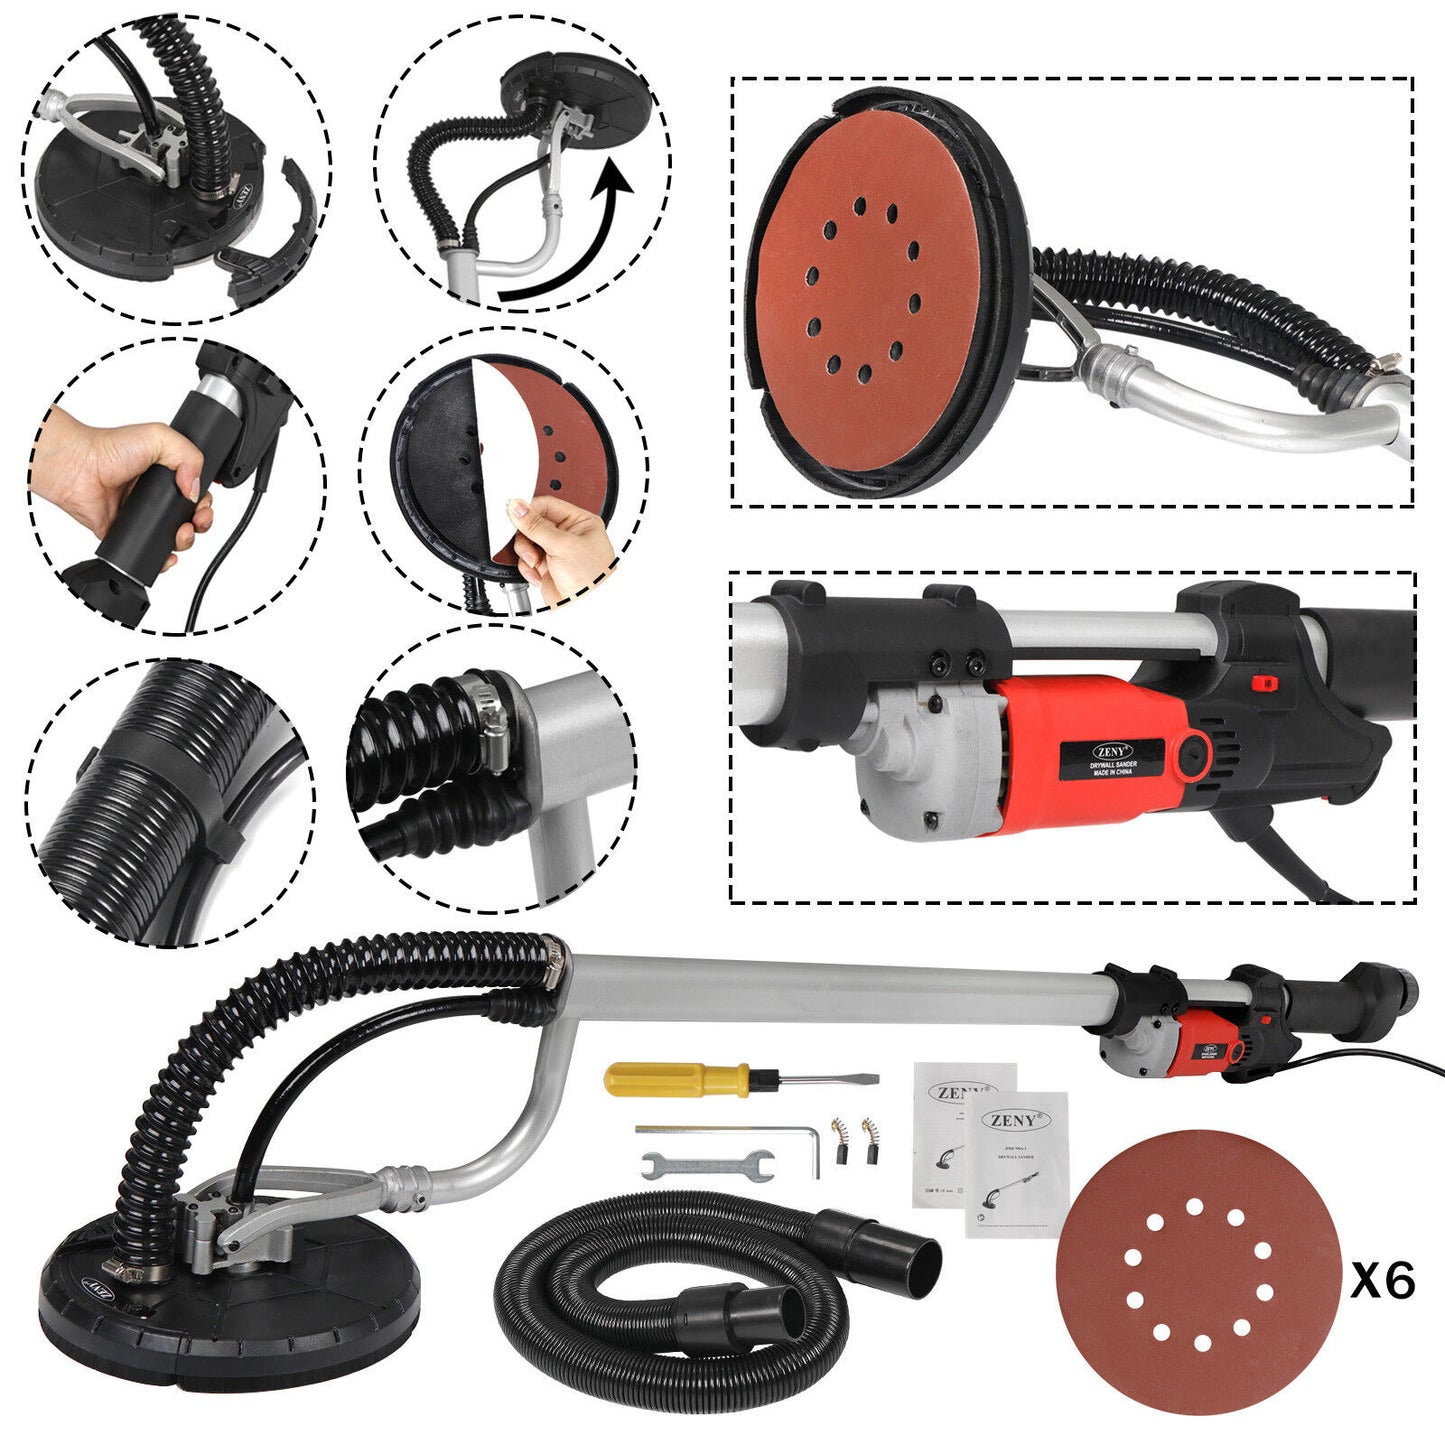 Drywall Sander 800 Watts Commercial Electric Variable Speed Free Sanding Pad New